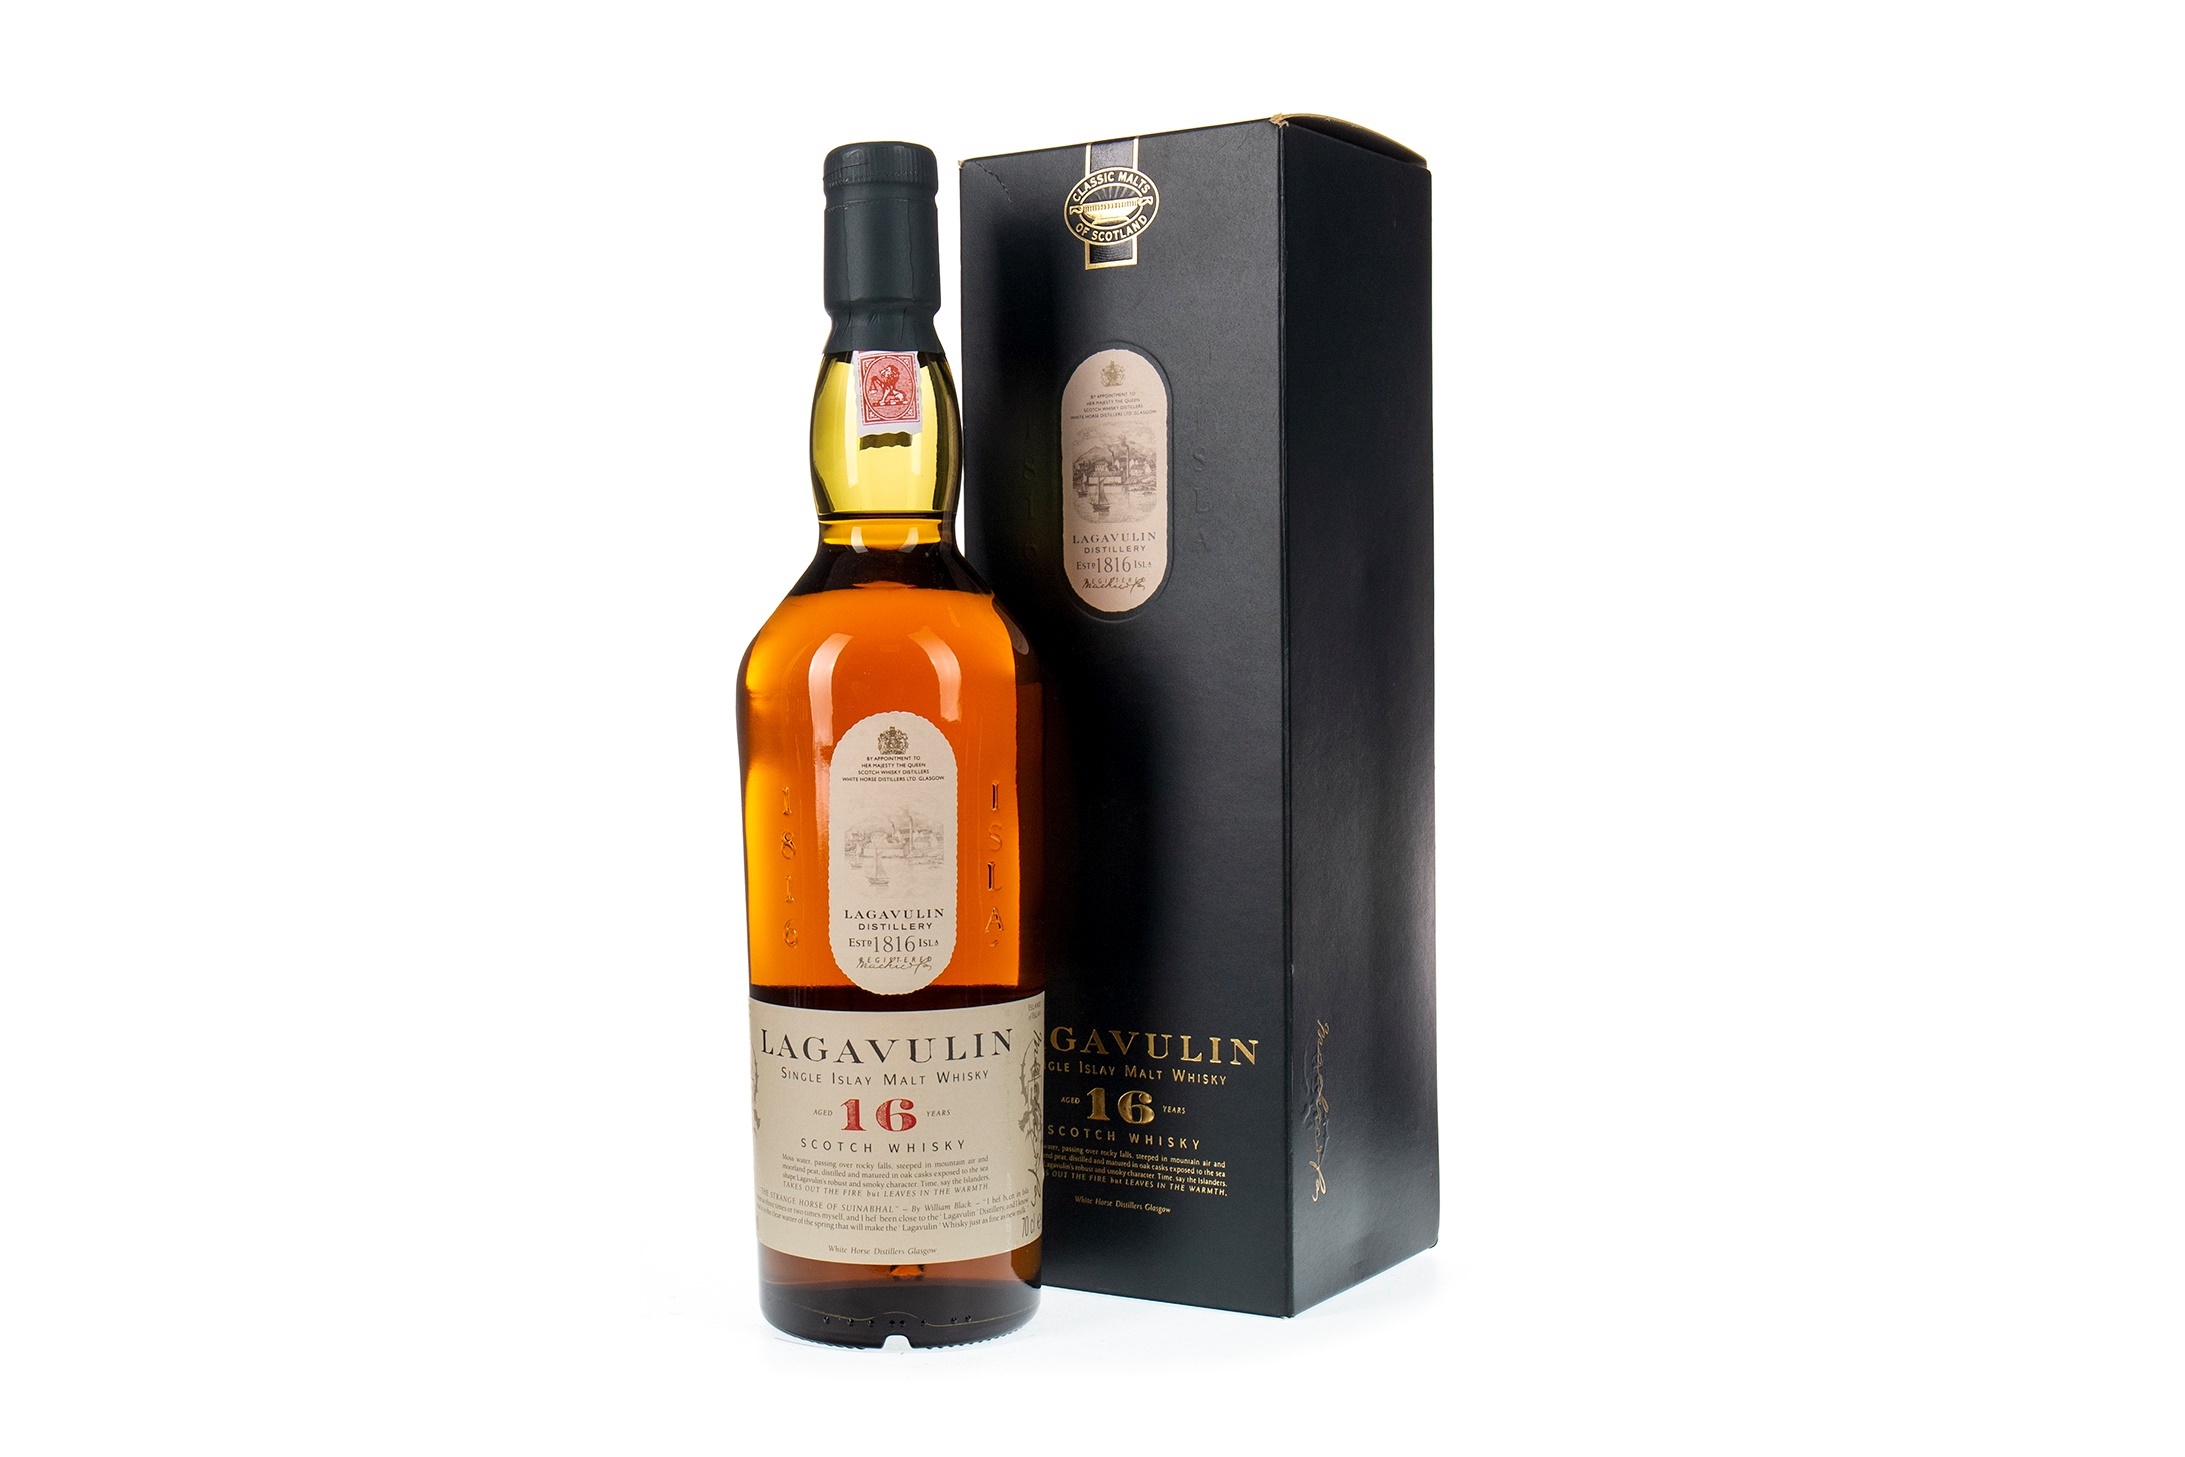 LAGAVULIN 16 YEARS OLD WHITE HORSE DISTILLERS